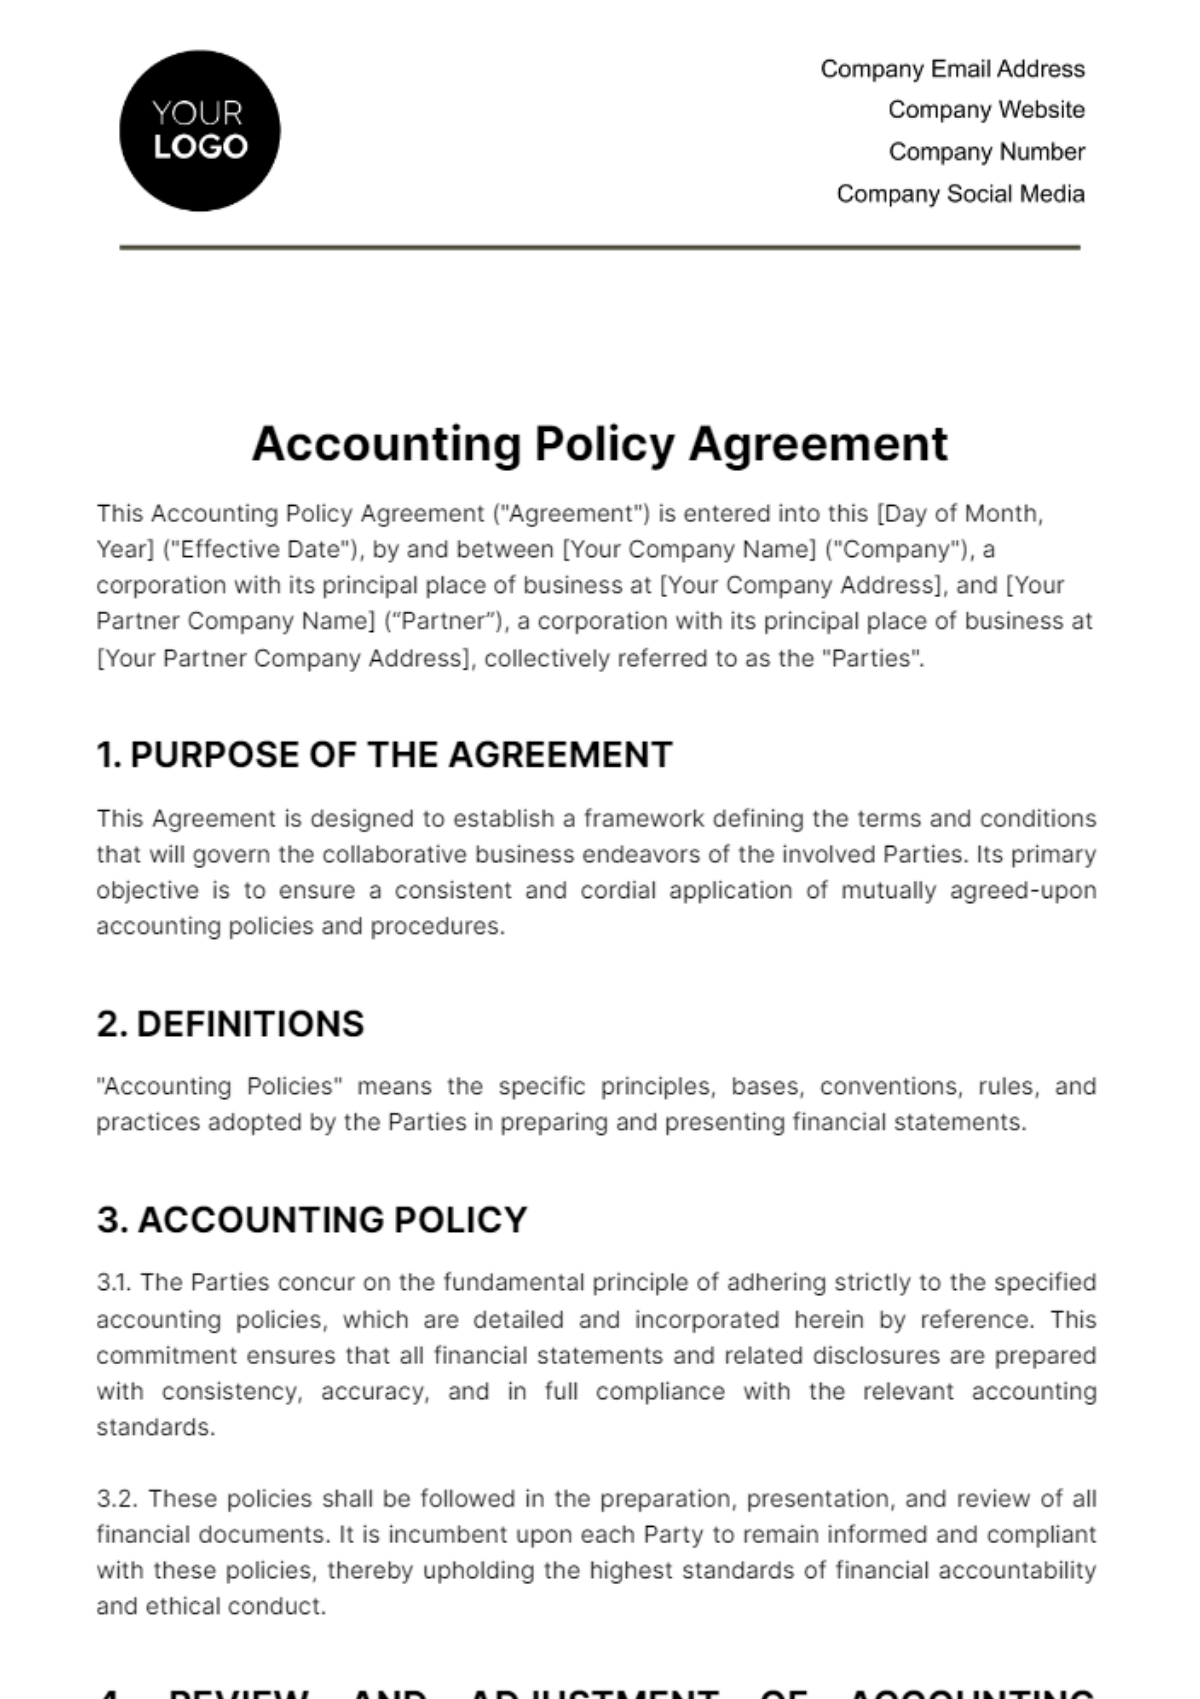 Accounting Policy Agreement Template